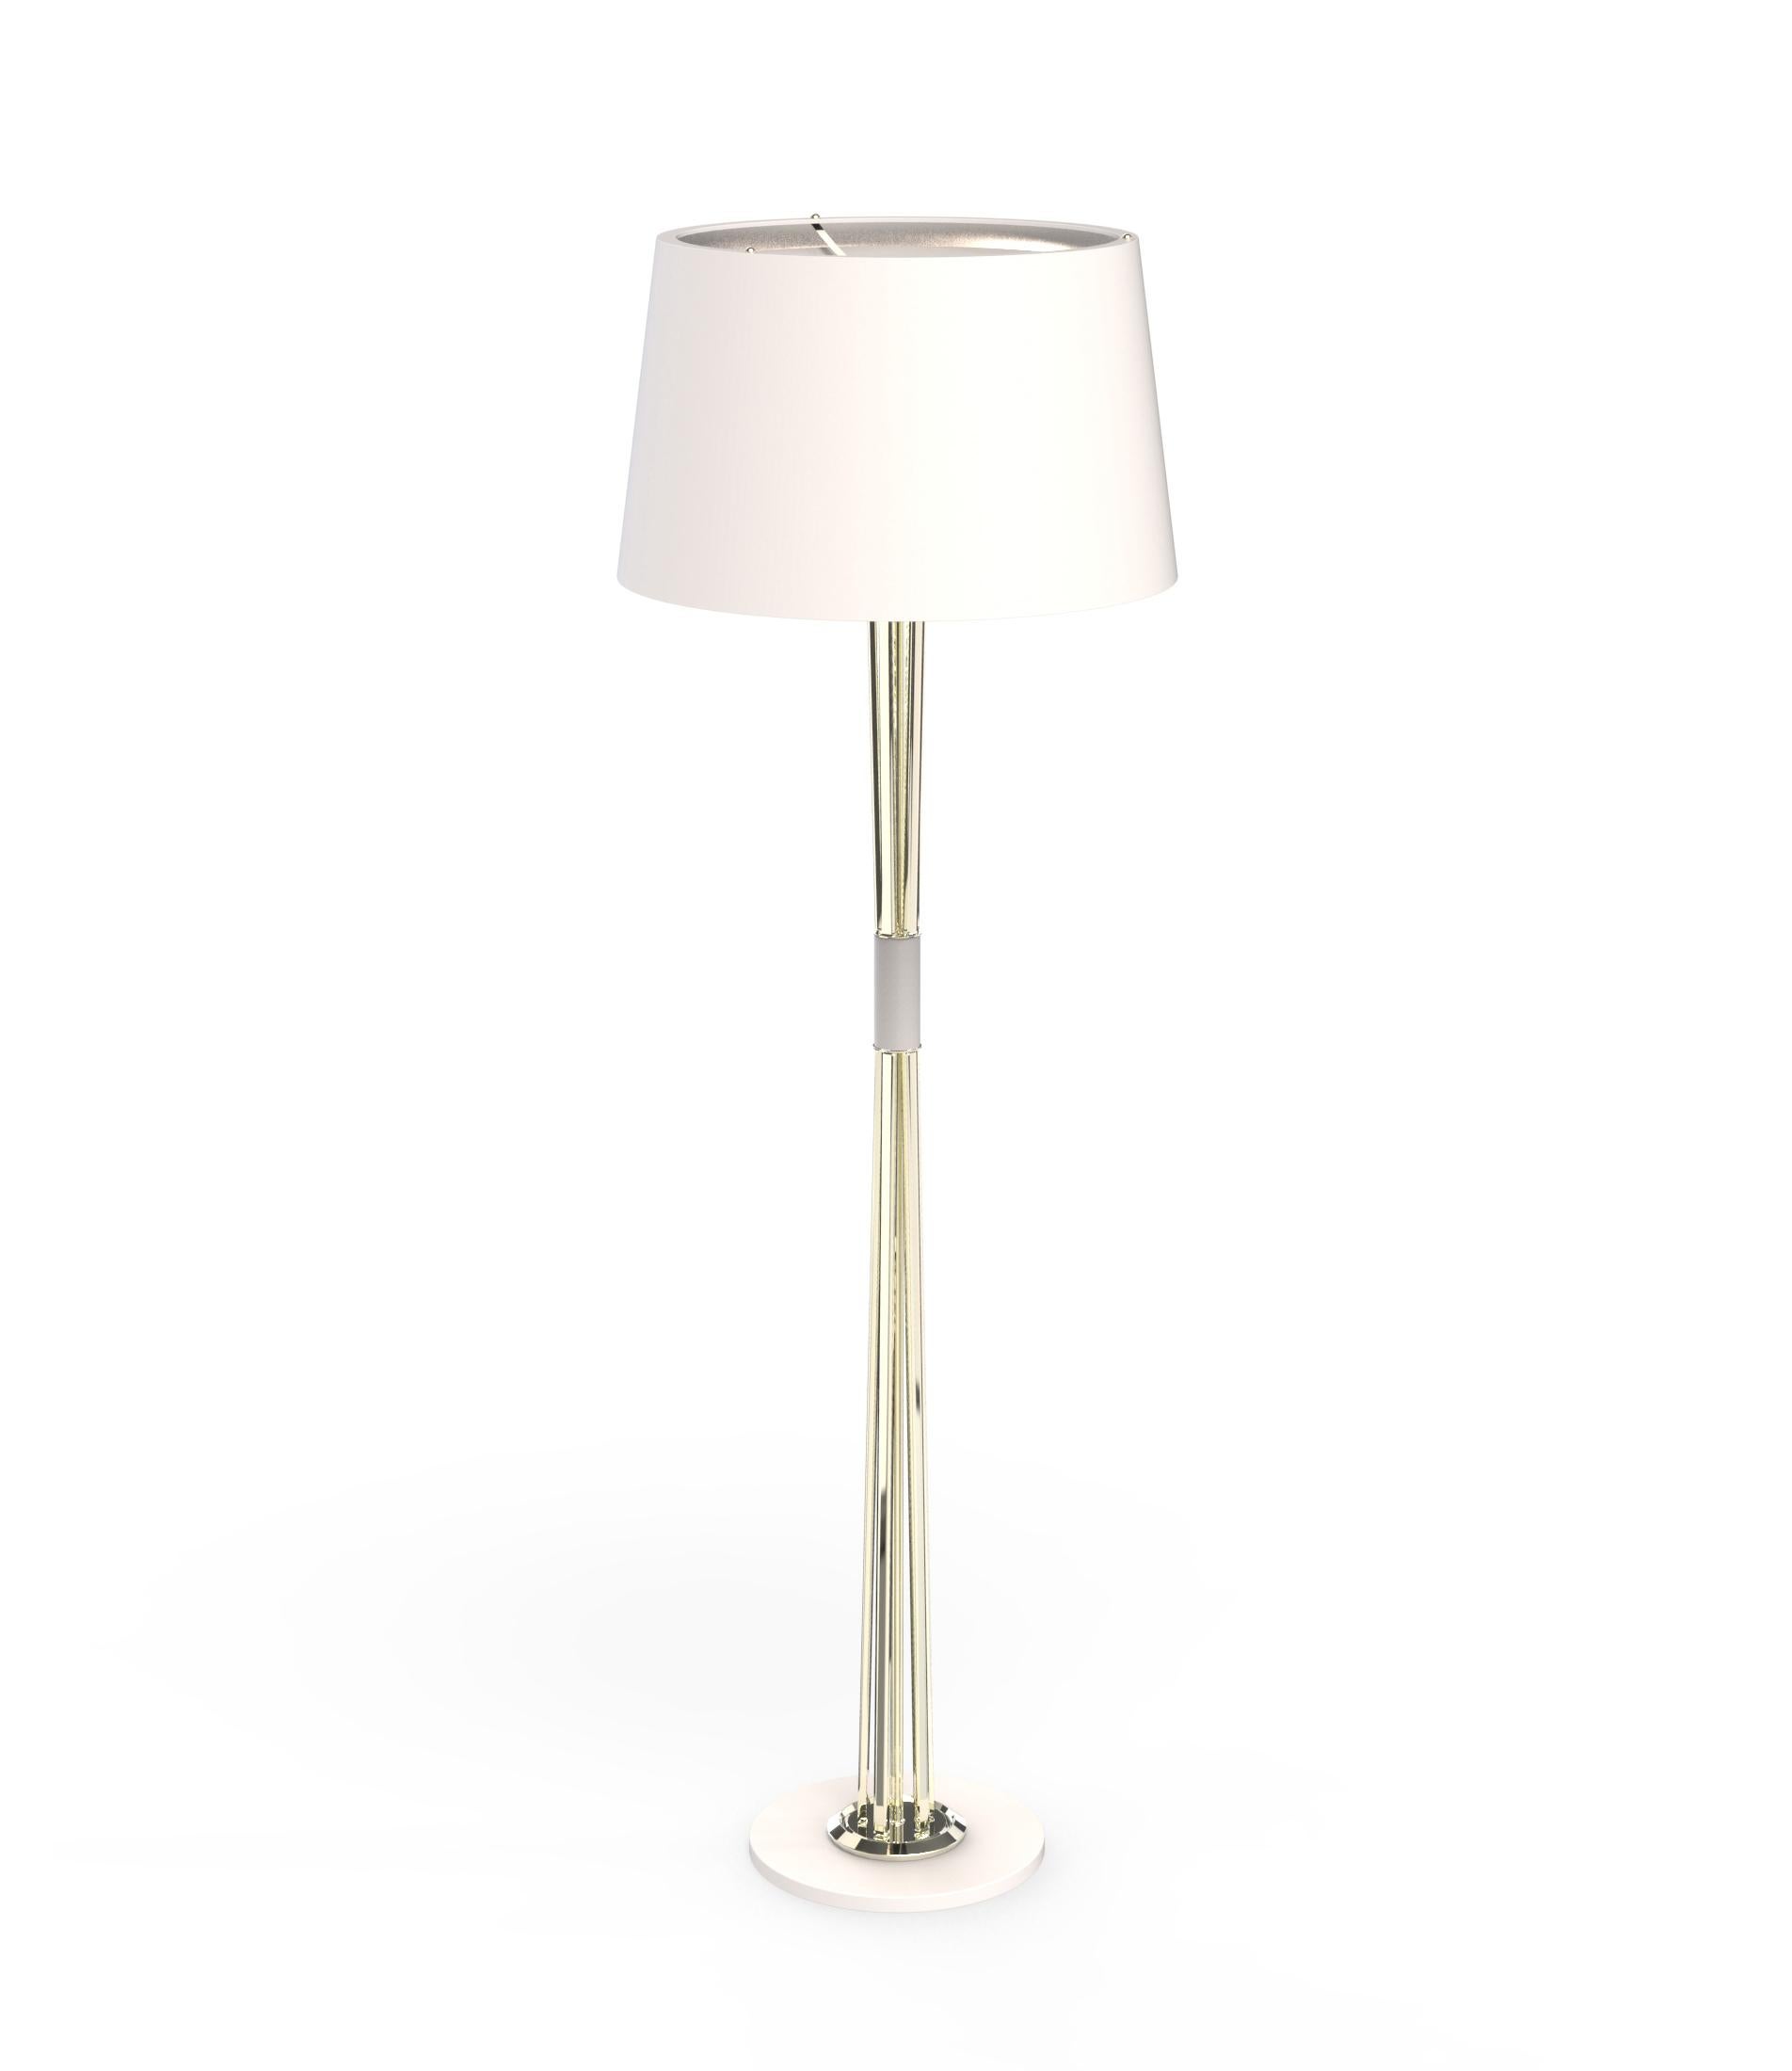 brass floor lamp with black shade